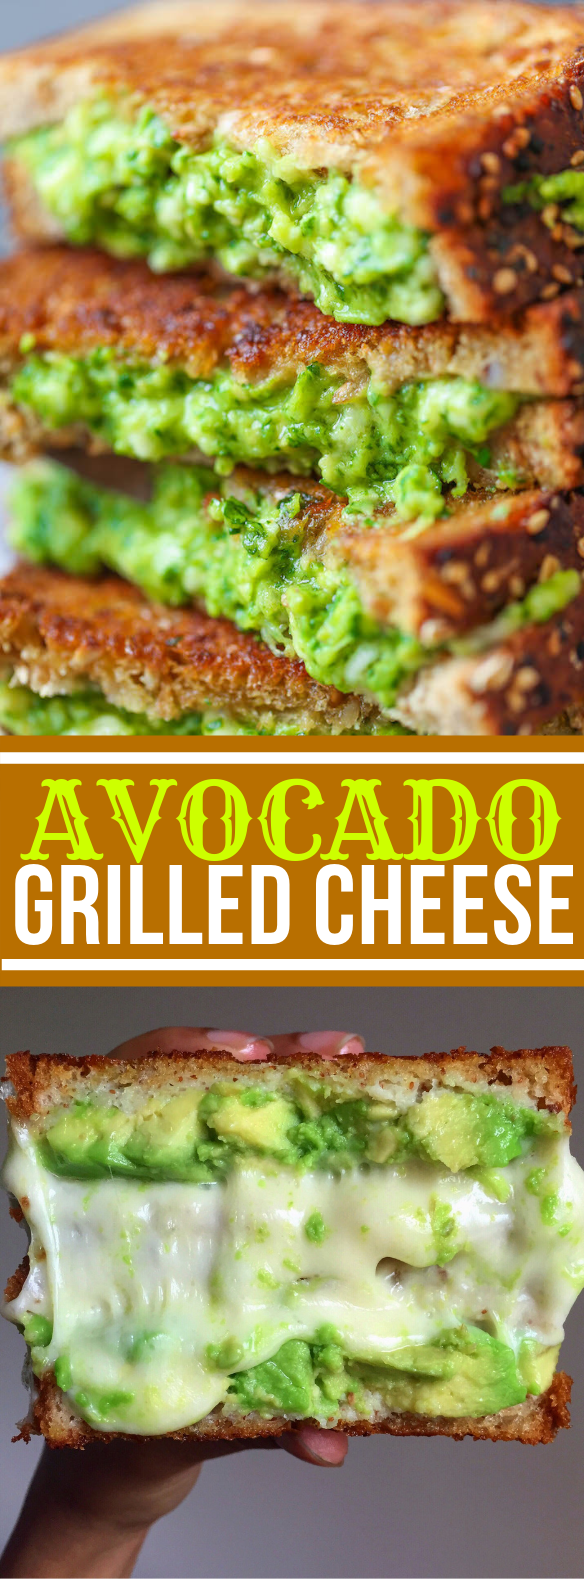 AVOCADO GRILLED CHEESE #vegetarian #breads